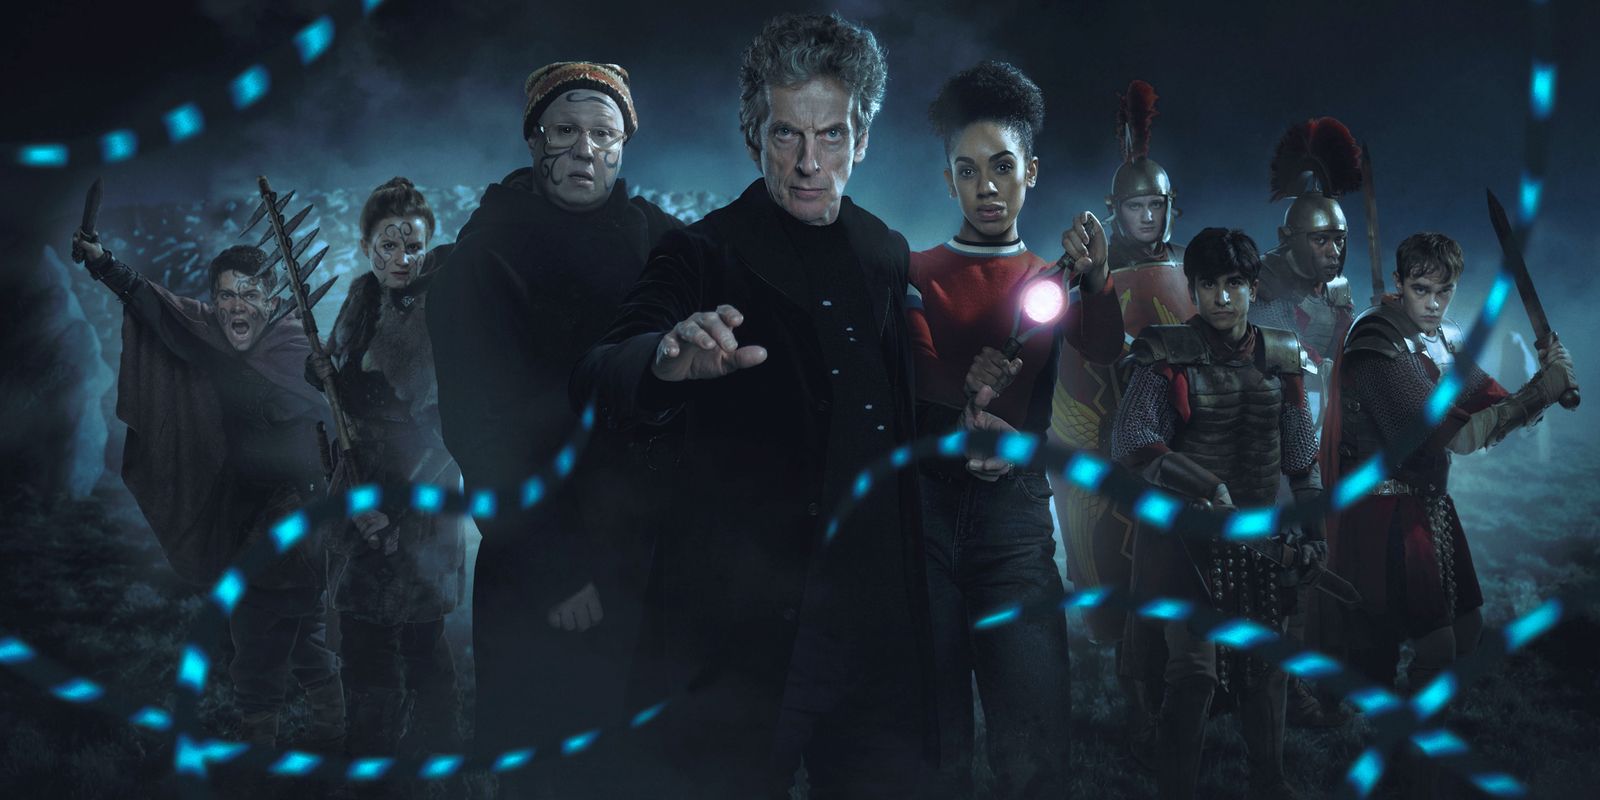 Doctor Who: The Eaters of Light Review & Discussion